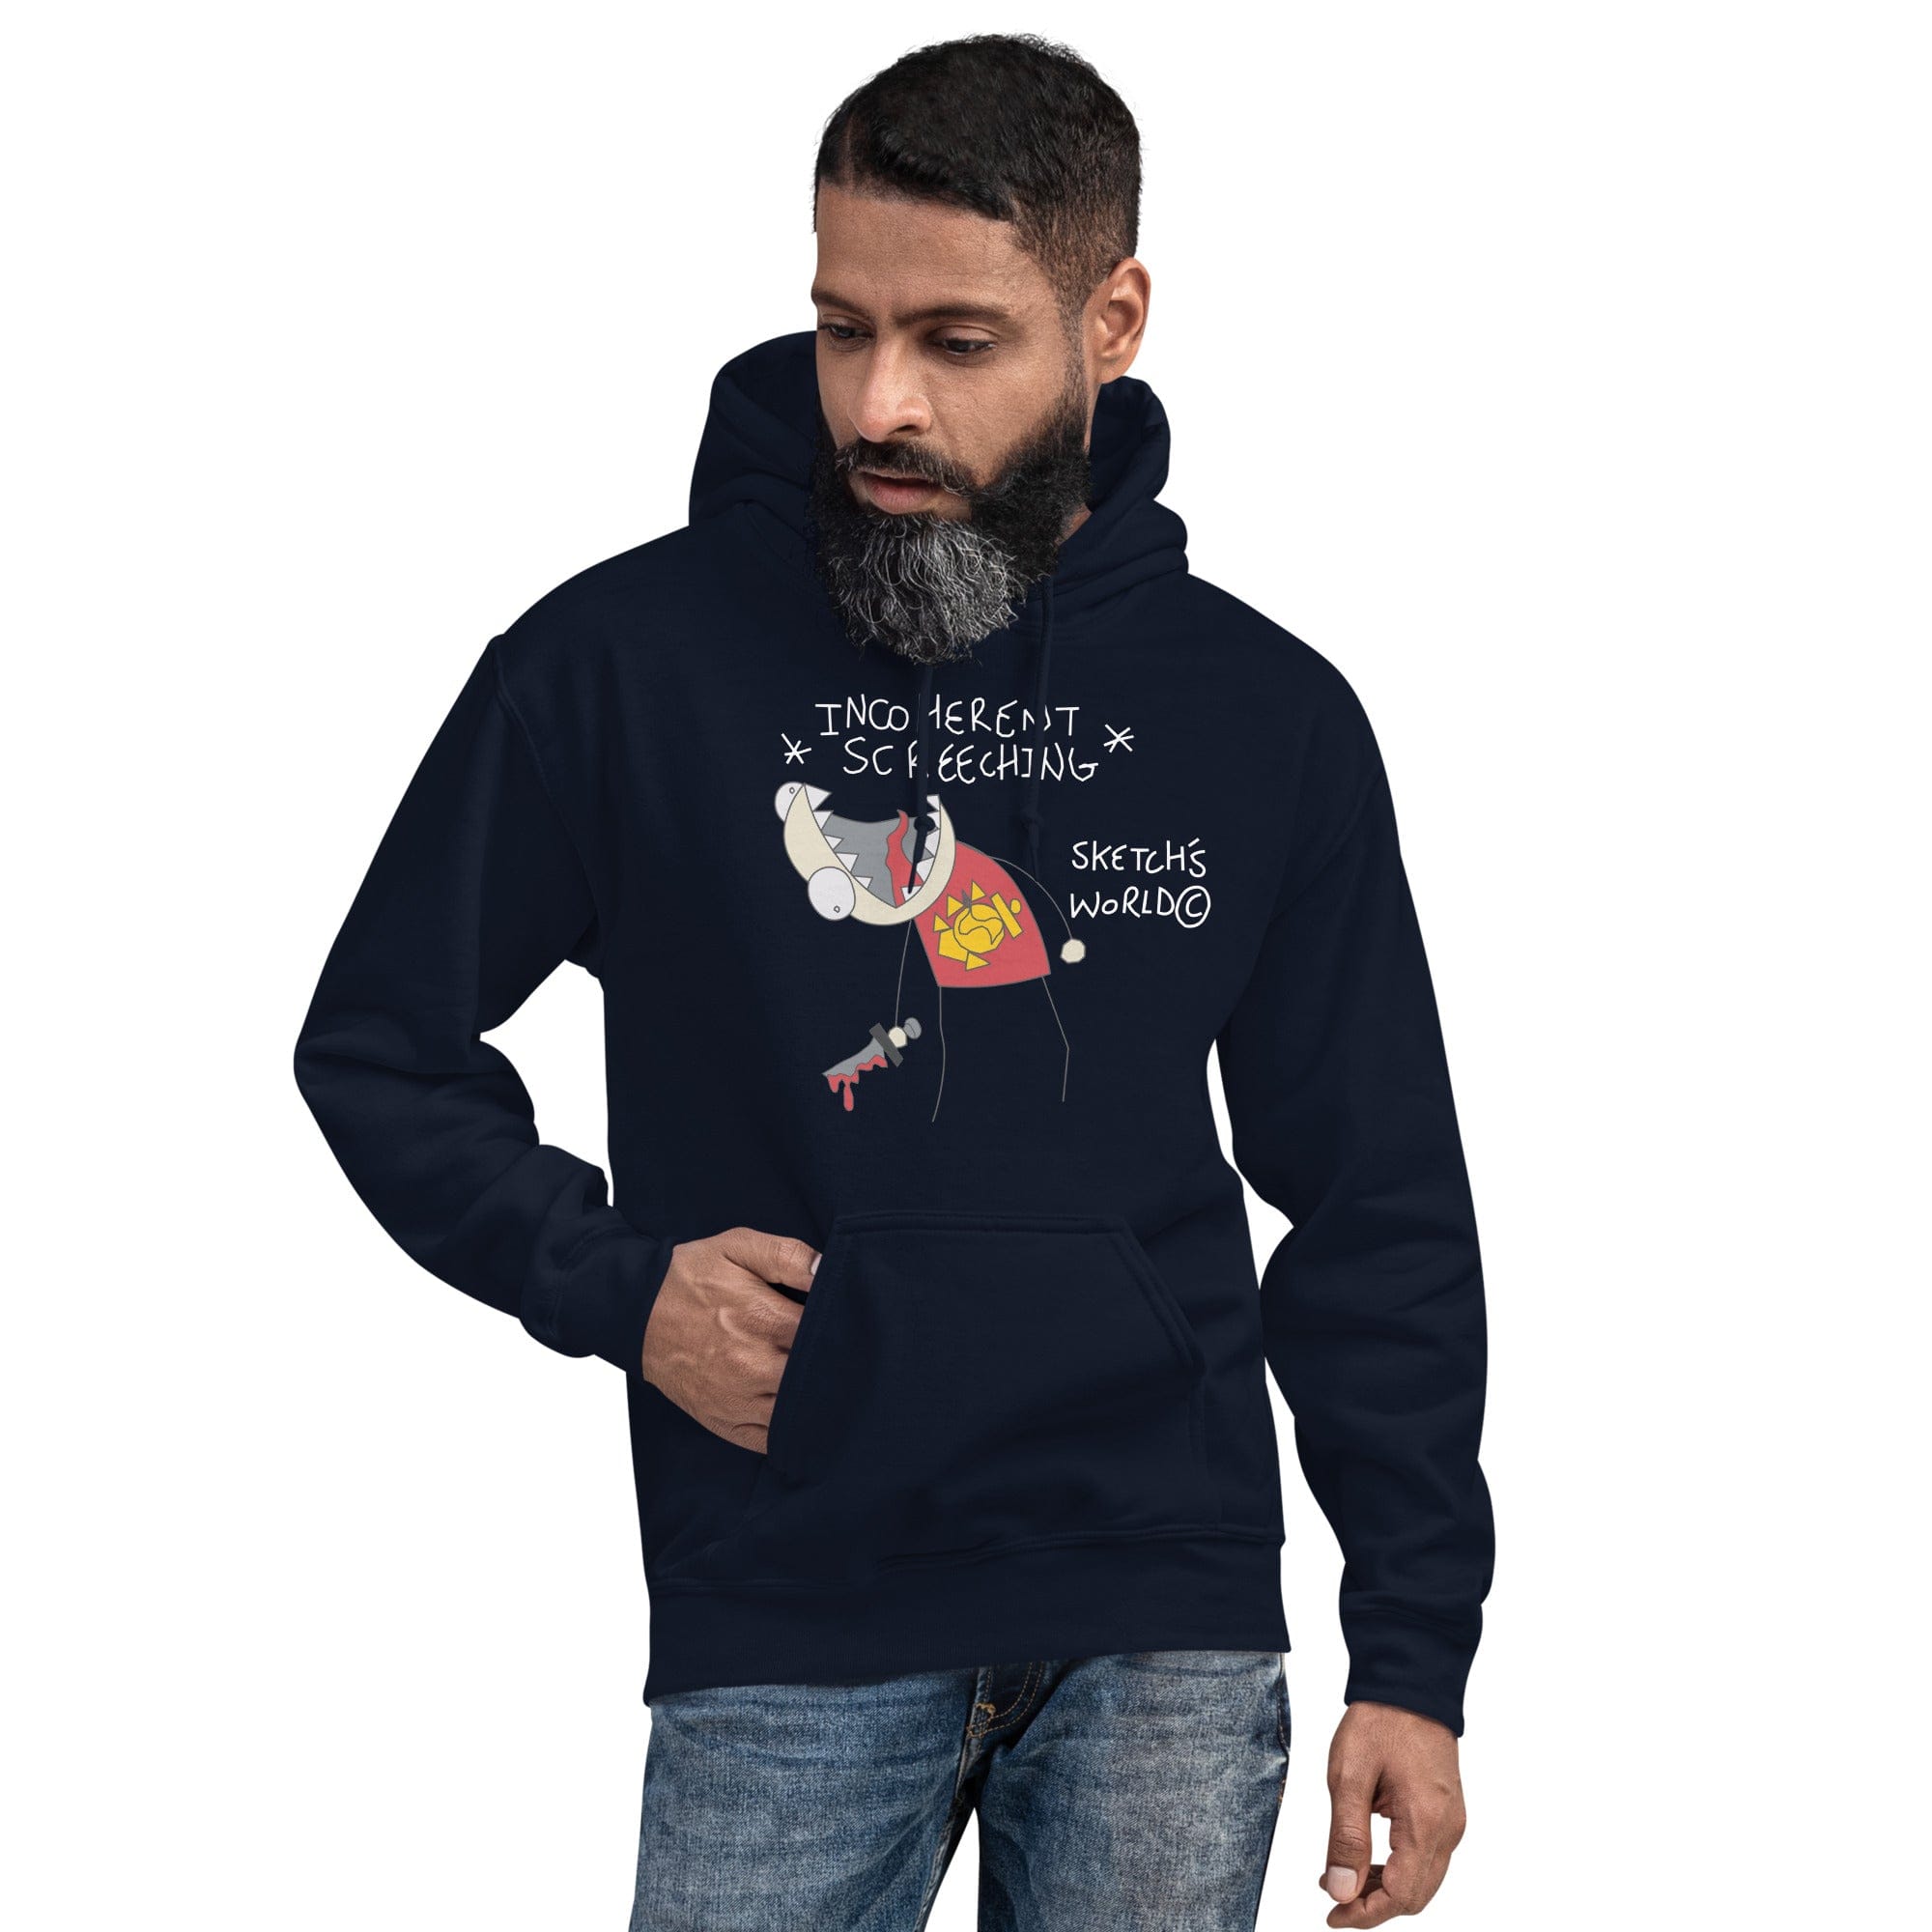 Tactical Gear Junkie Navy / S Sketch's World © Officially Licensed - Incoherent Screeching Marine Unisex Hoodie